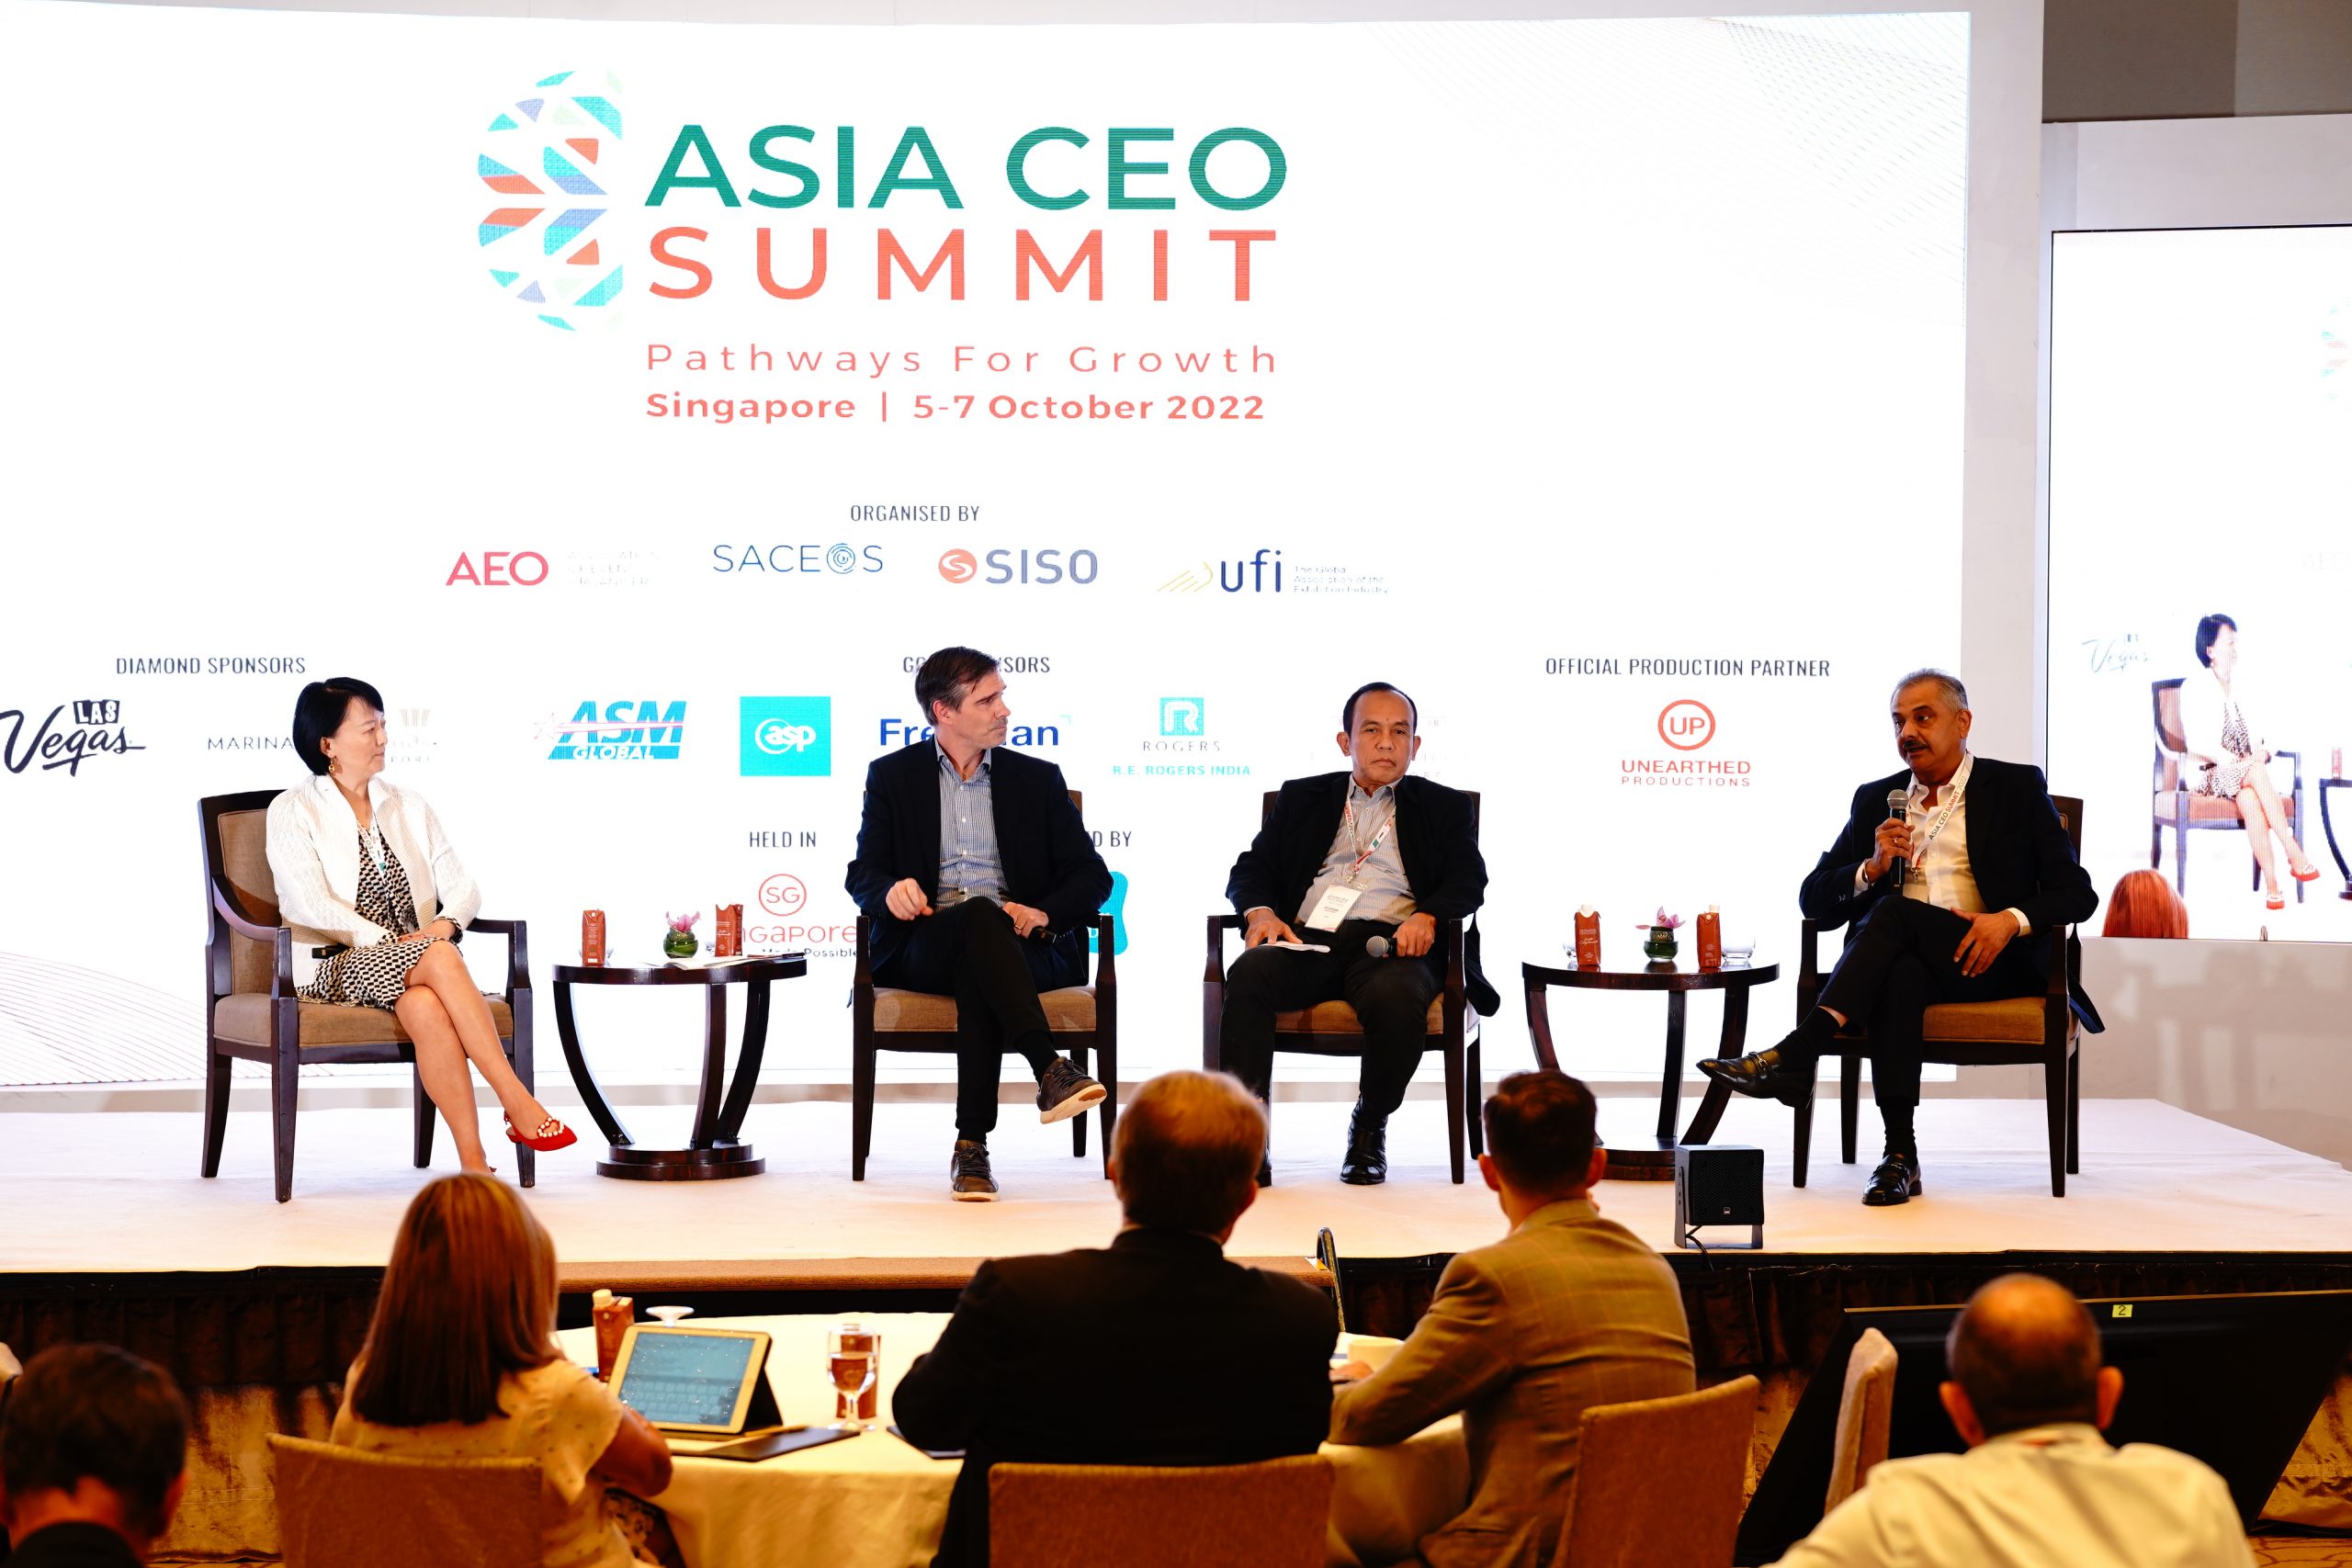 Asia CEO Summit gathers global Business Events leaders in commitment to the region’s growth